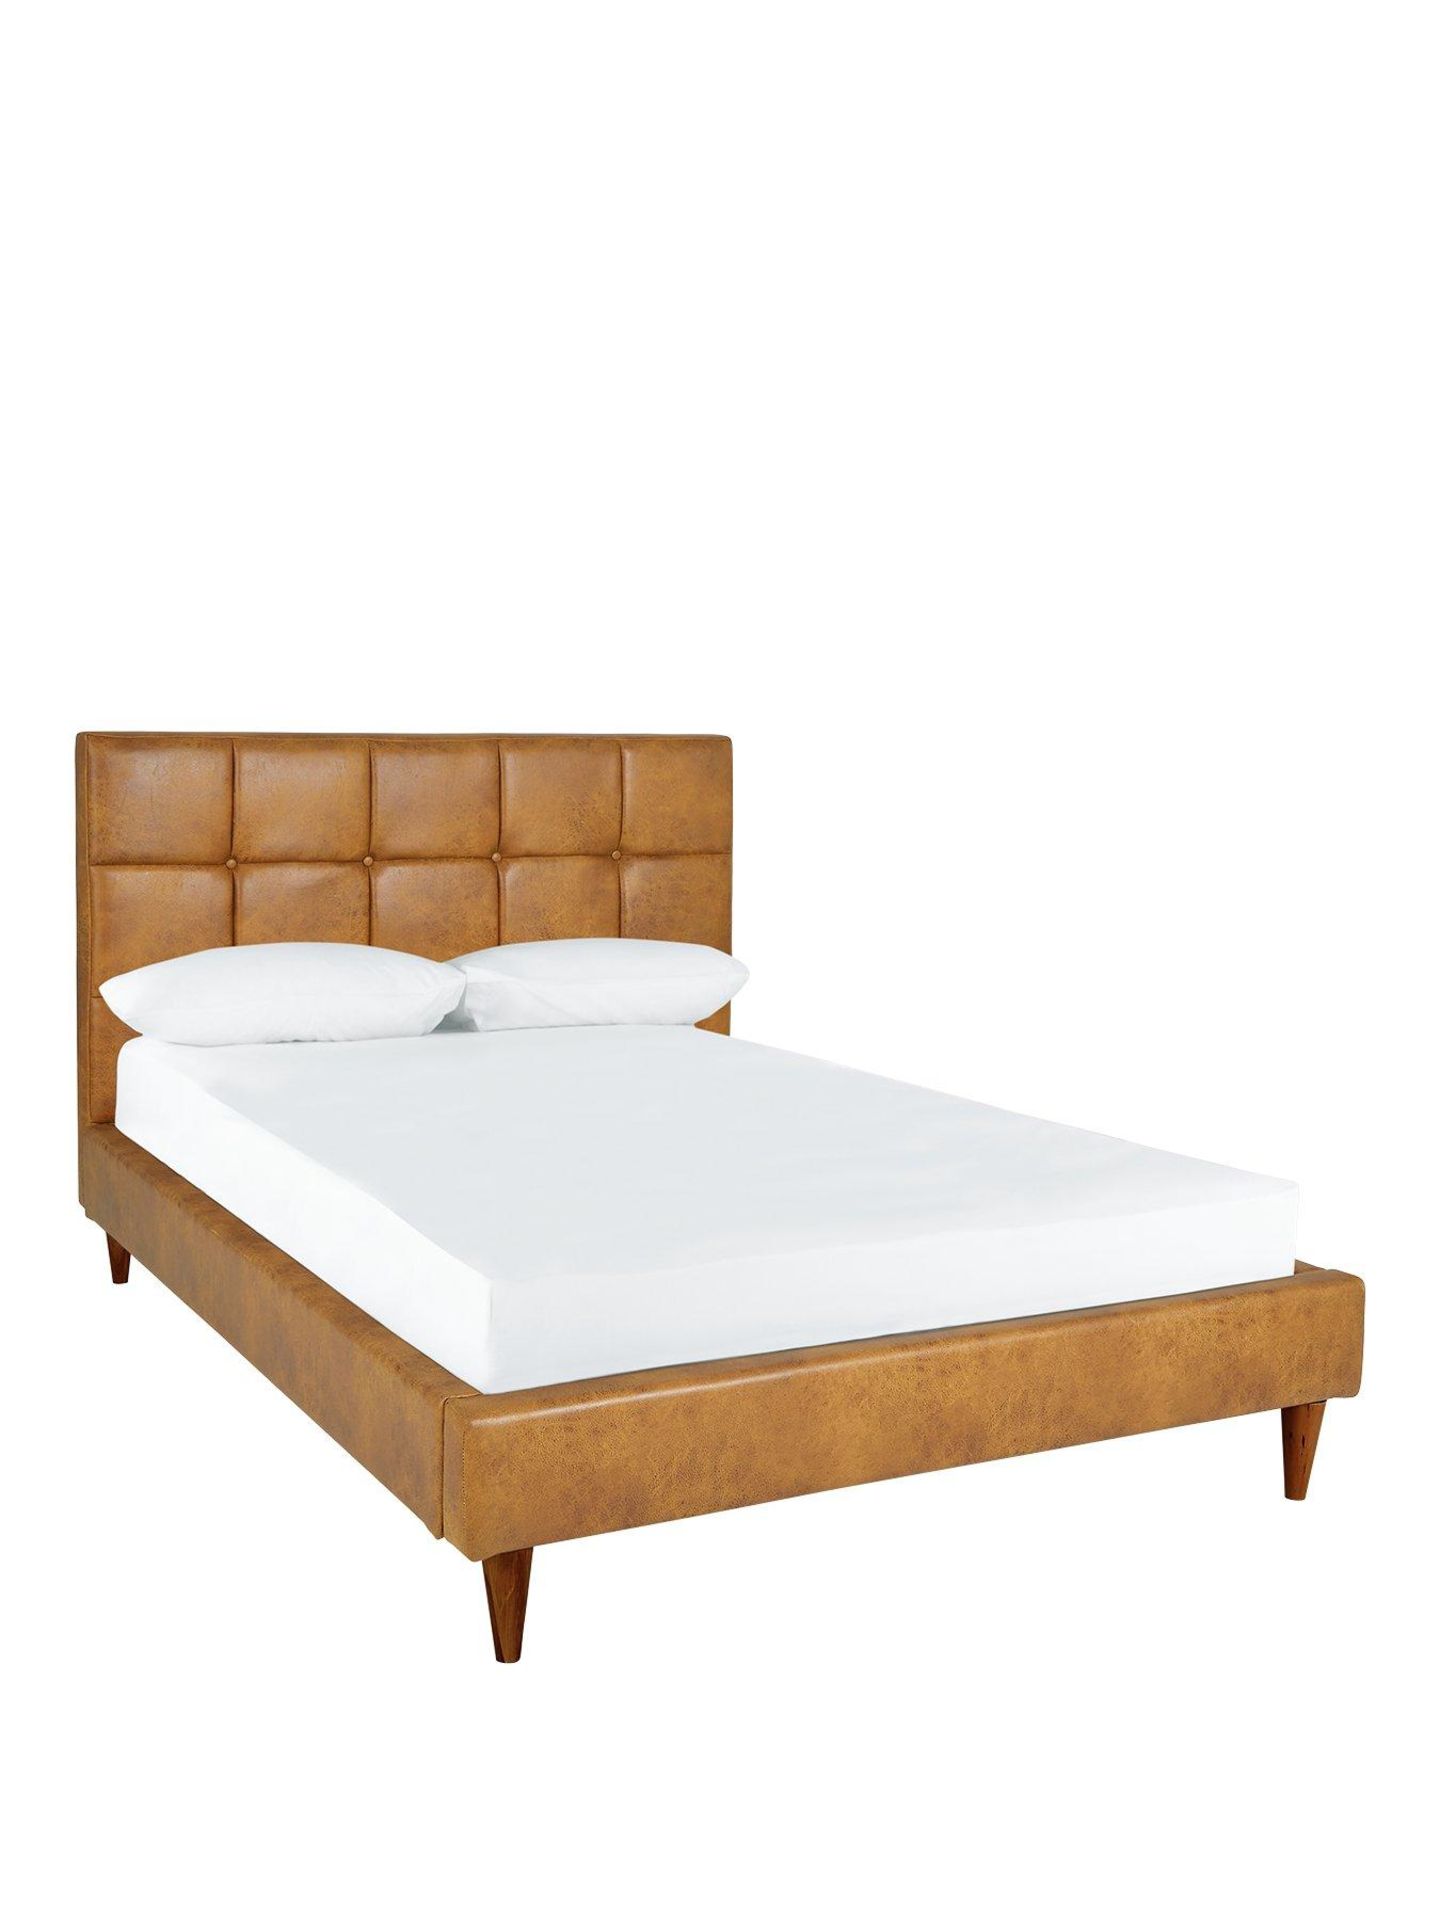 Boxed Item Olson Double Bed [Tan] And Mattress Set Rrp:¬£688 - Image 3 of 3